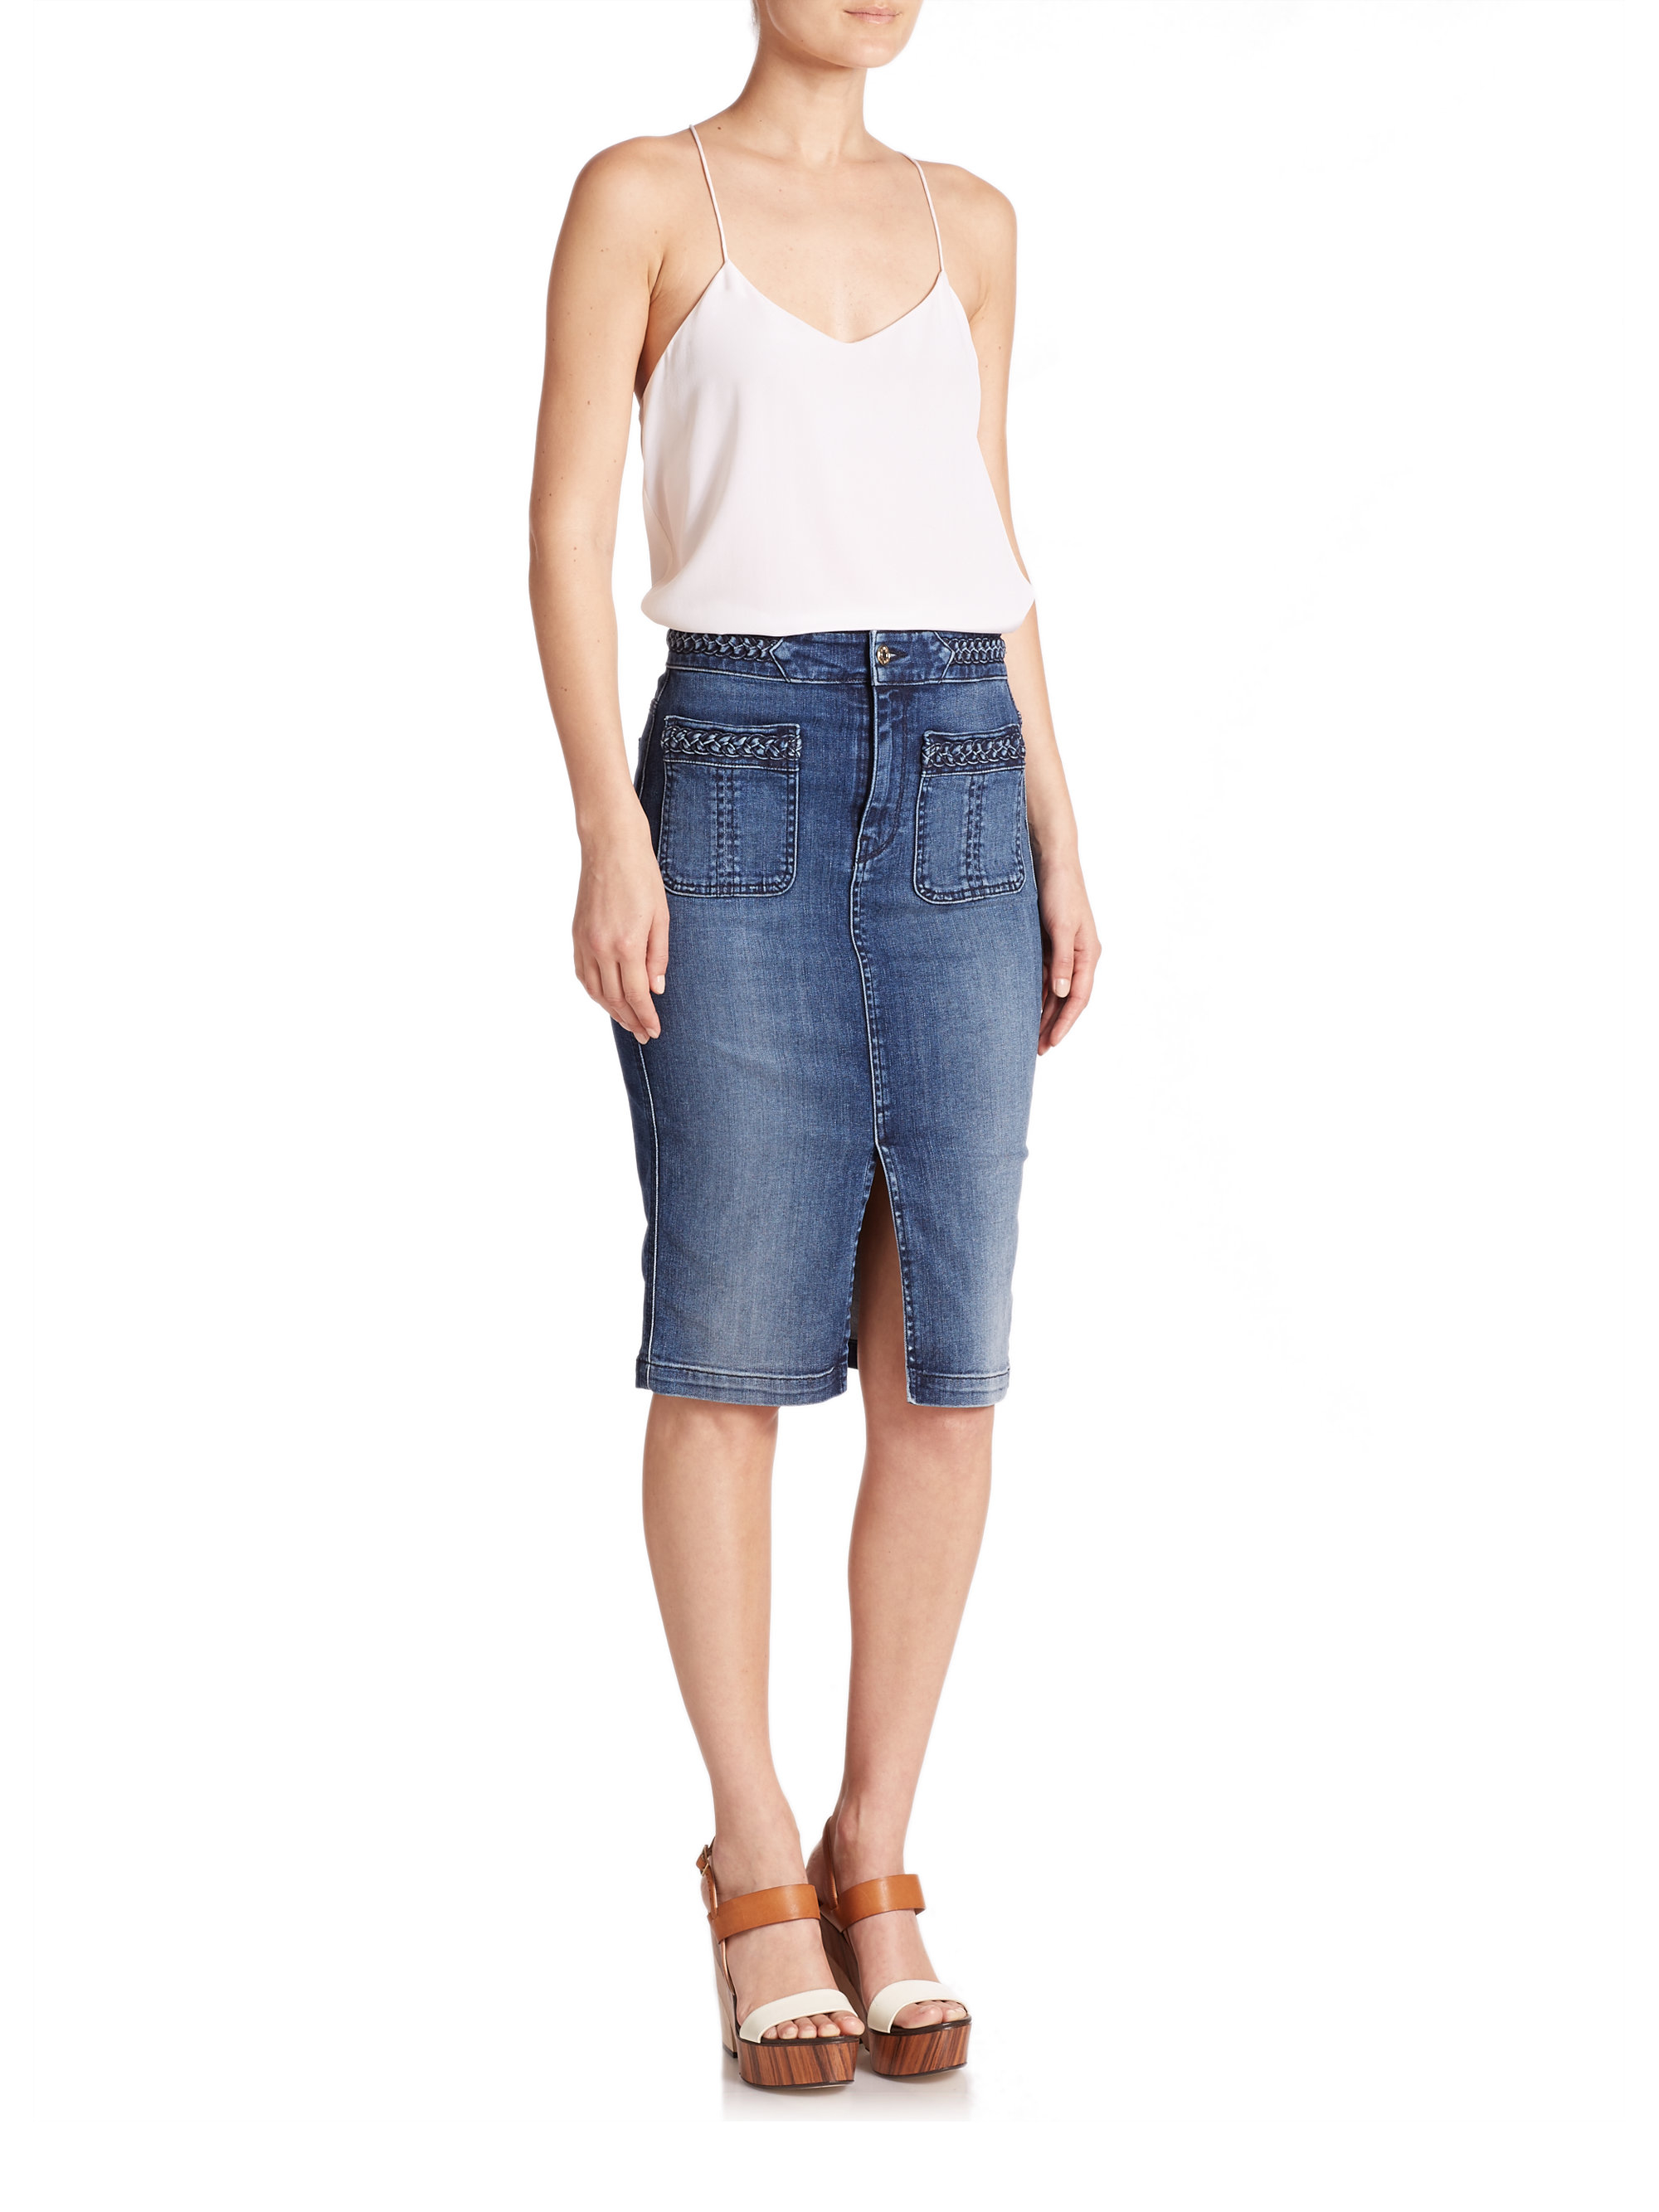 Lyst - 7 For All Mankind Denim Pencil Skirt in Blue